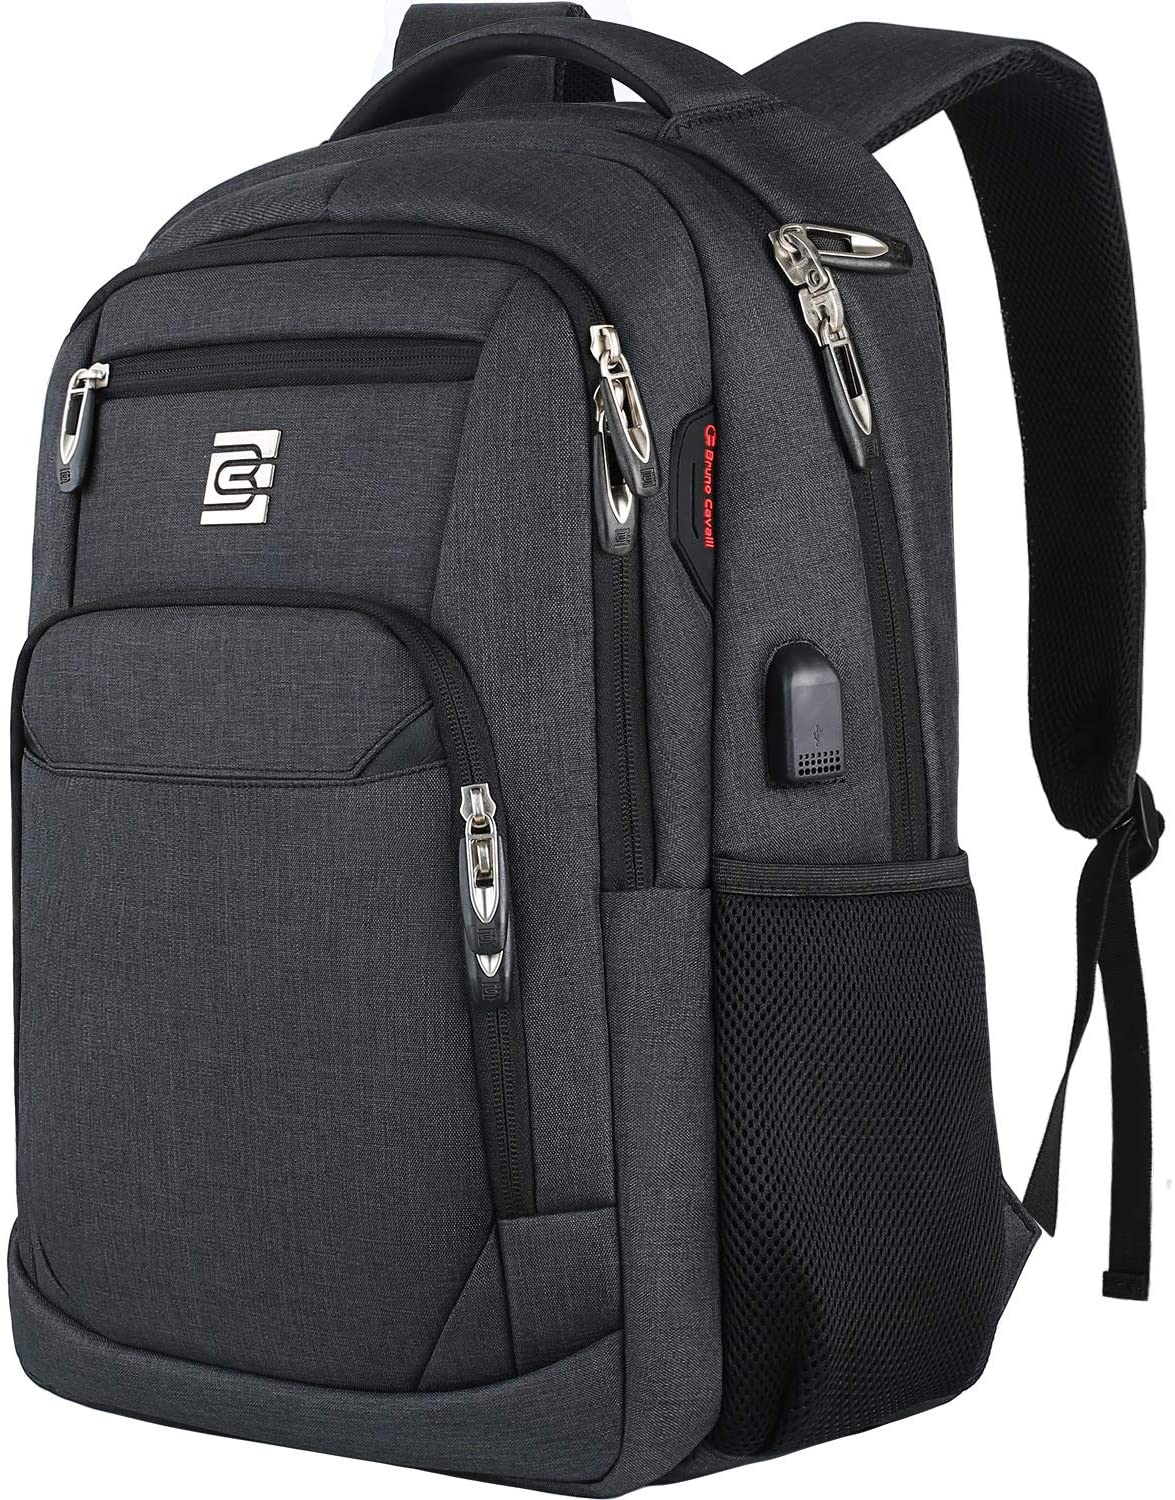 Business Travel Anti Theft Slim Durable Laptops Backpack